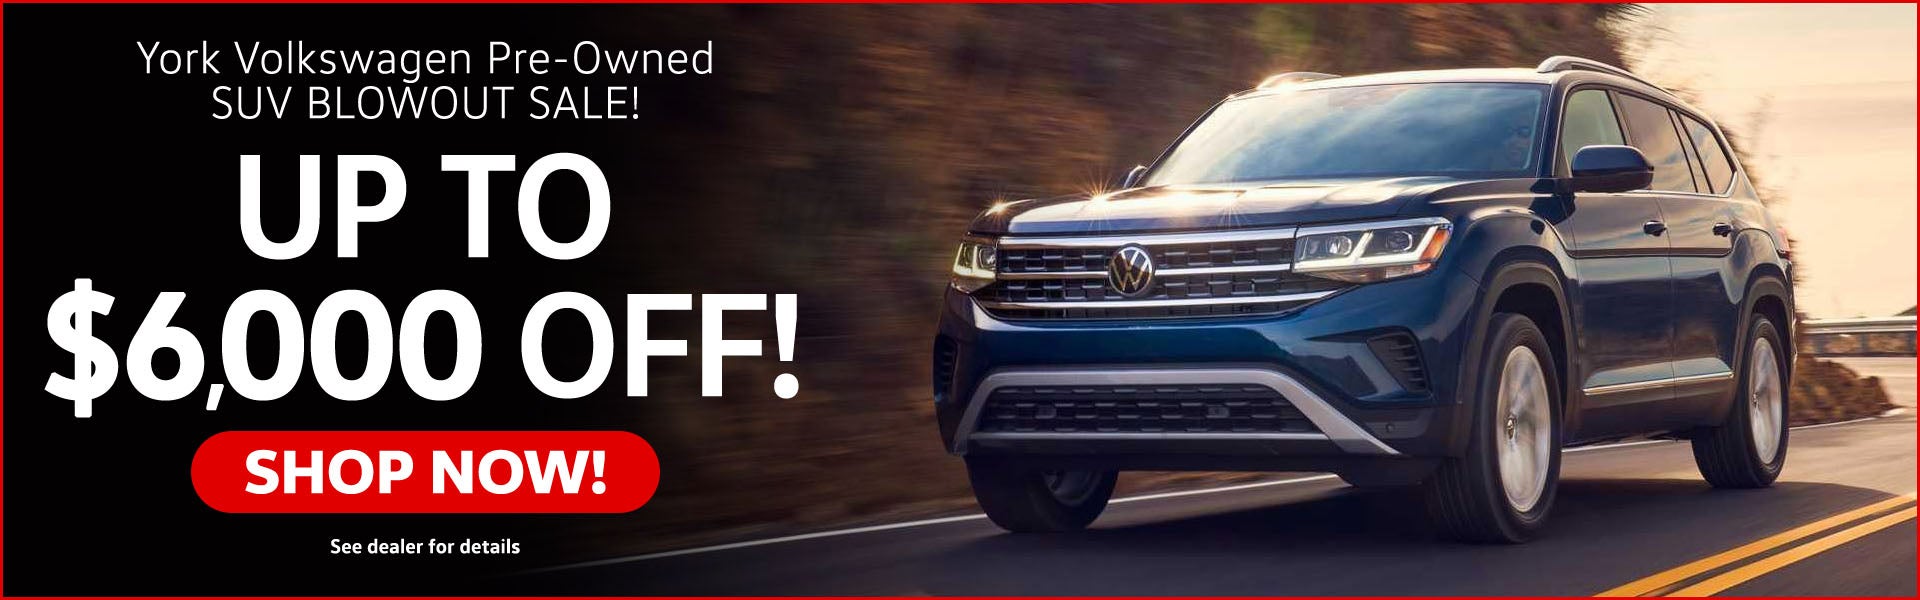 York VW Pre-Owned SUV Blowout Sale! Up to $6,000 Off!